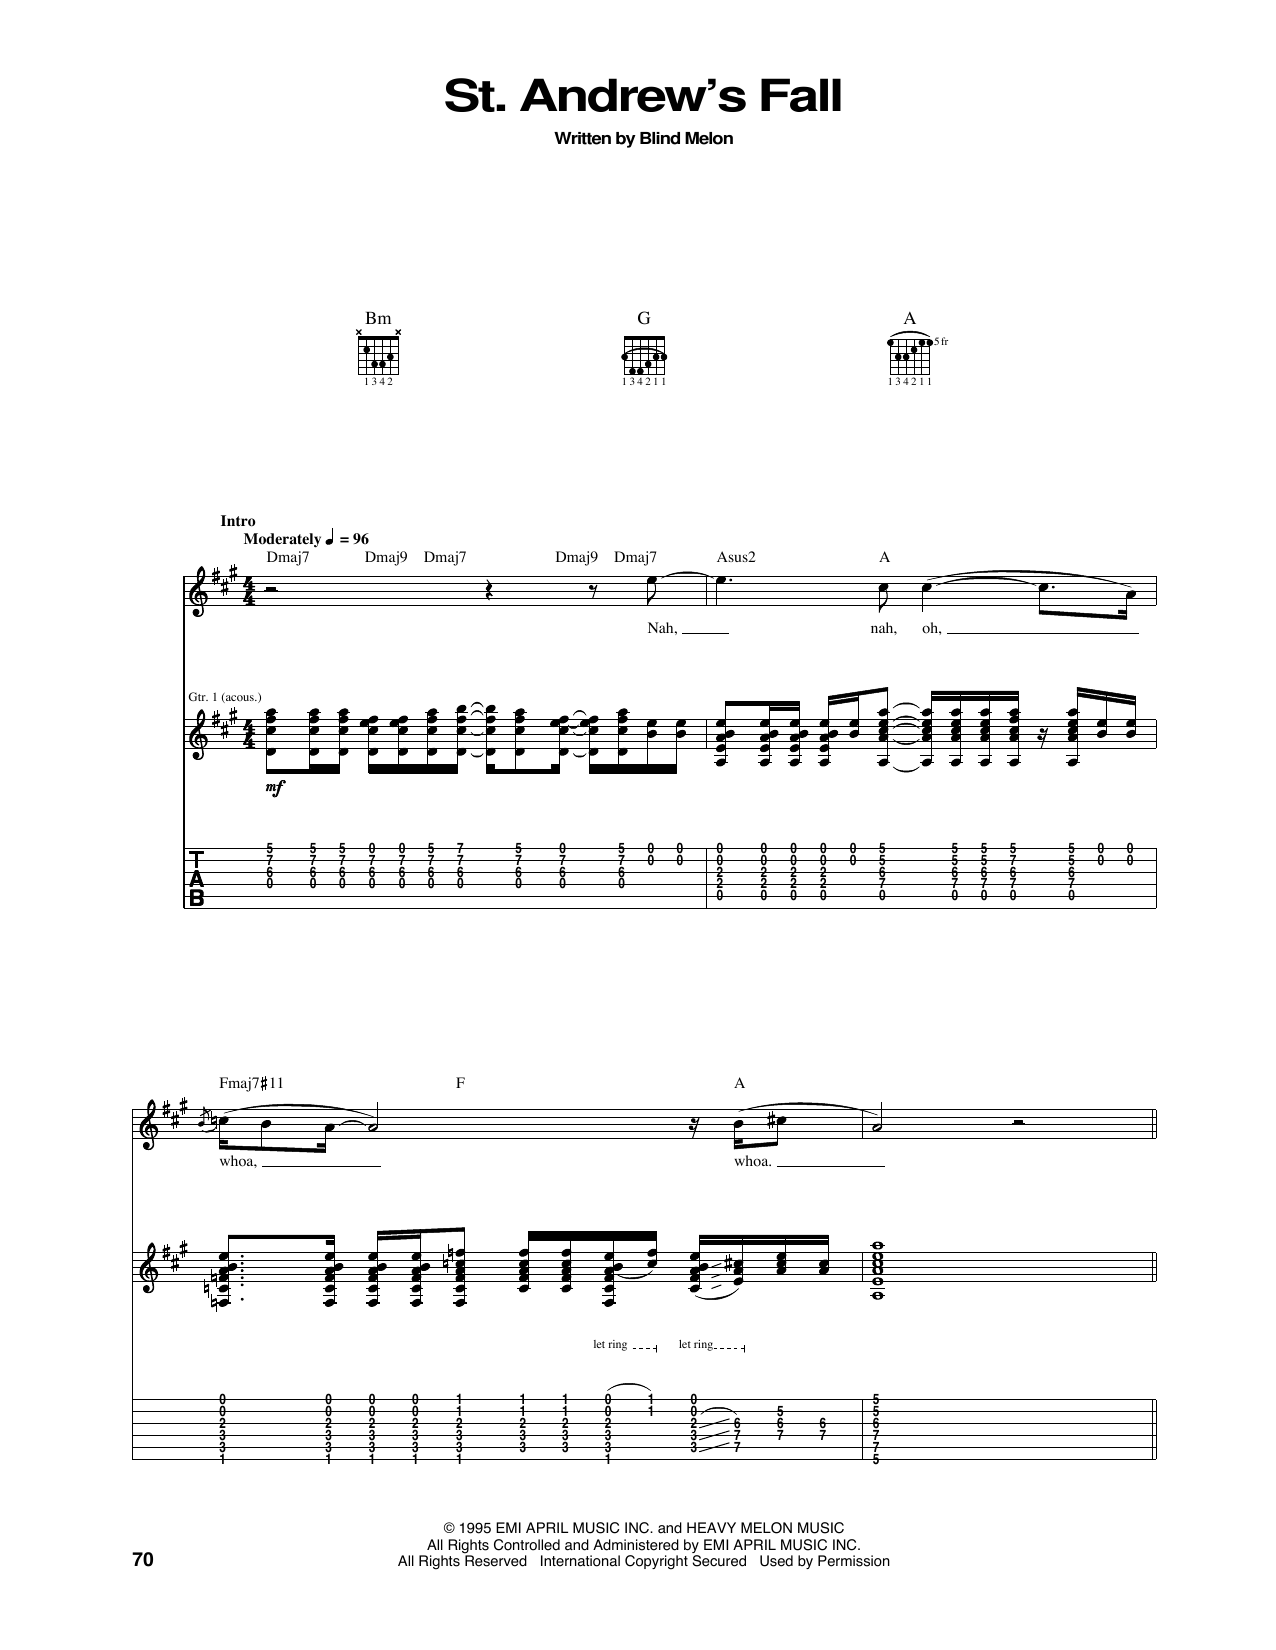 Download Blind Melon St. Andrew's Fall Sheet Music